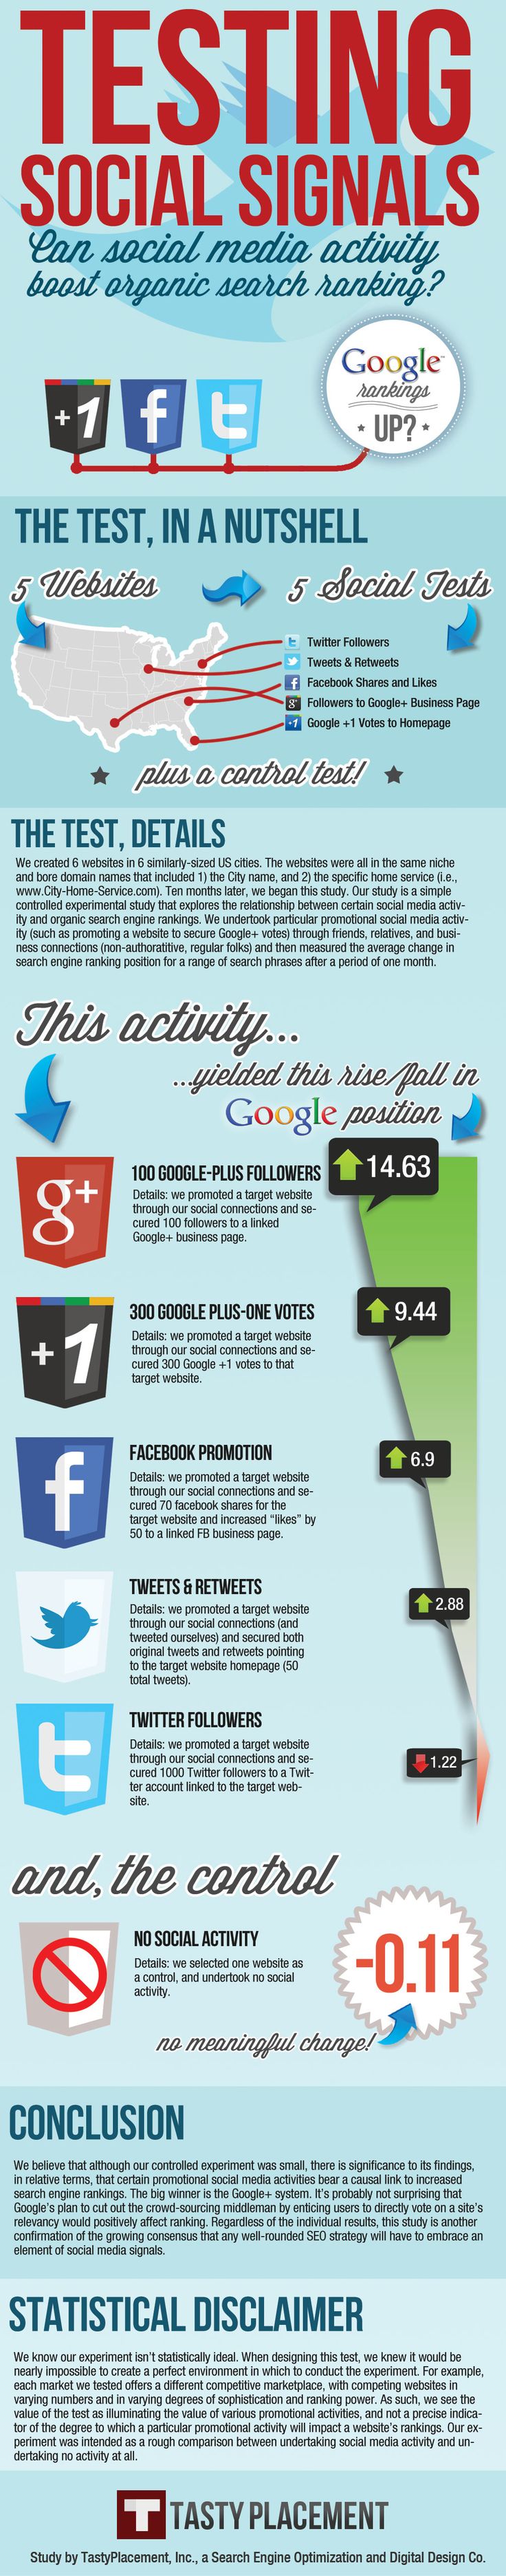 Social media has an impact on organic search ranking. See which platforms perform best with this infographic.